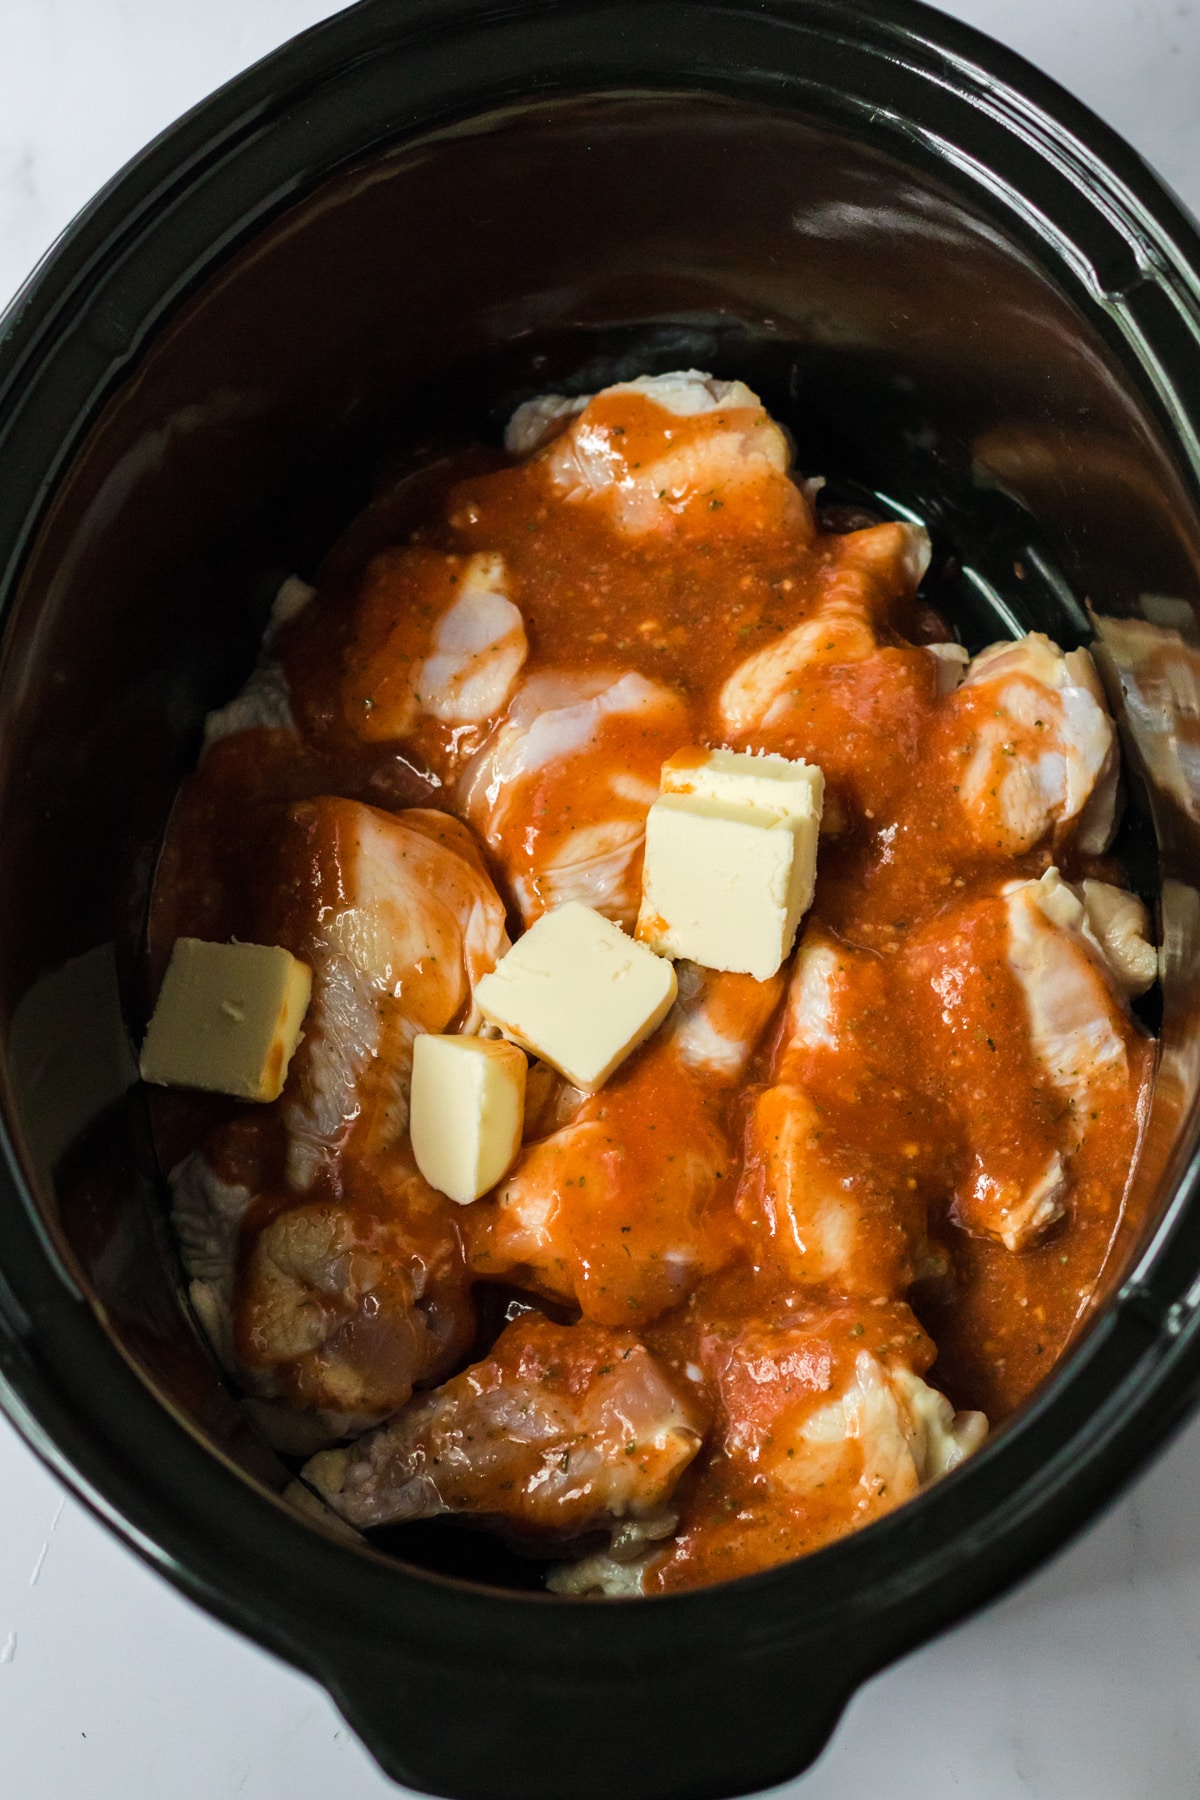 Adding all the ingredients in a slow cooker is one process of preparing Slow Cooker Buffalo Ranch Wings